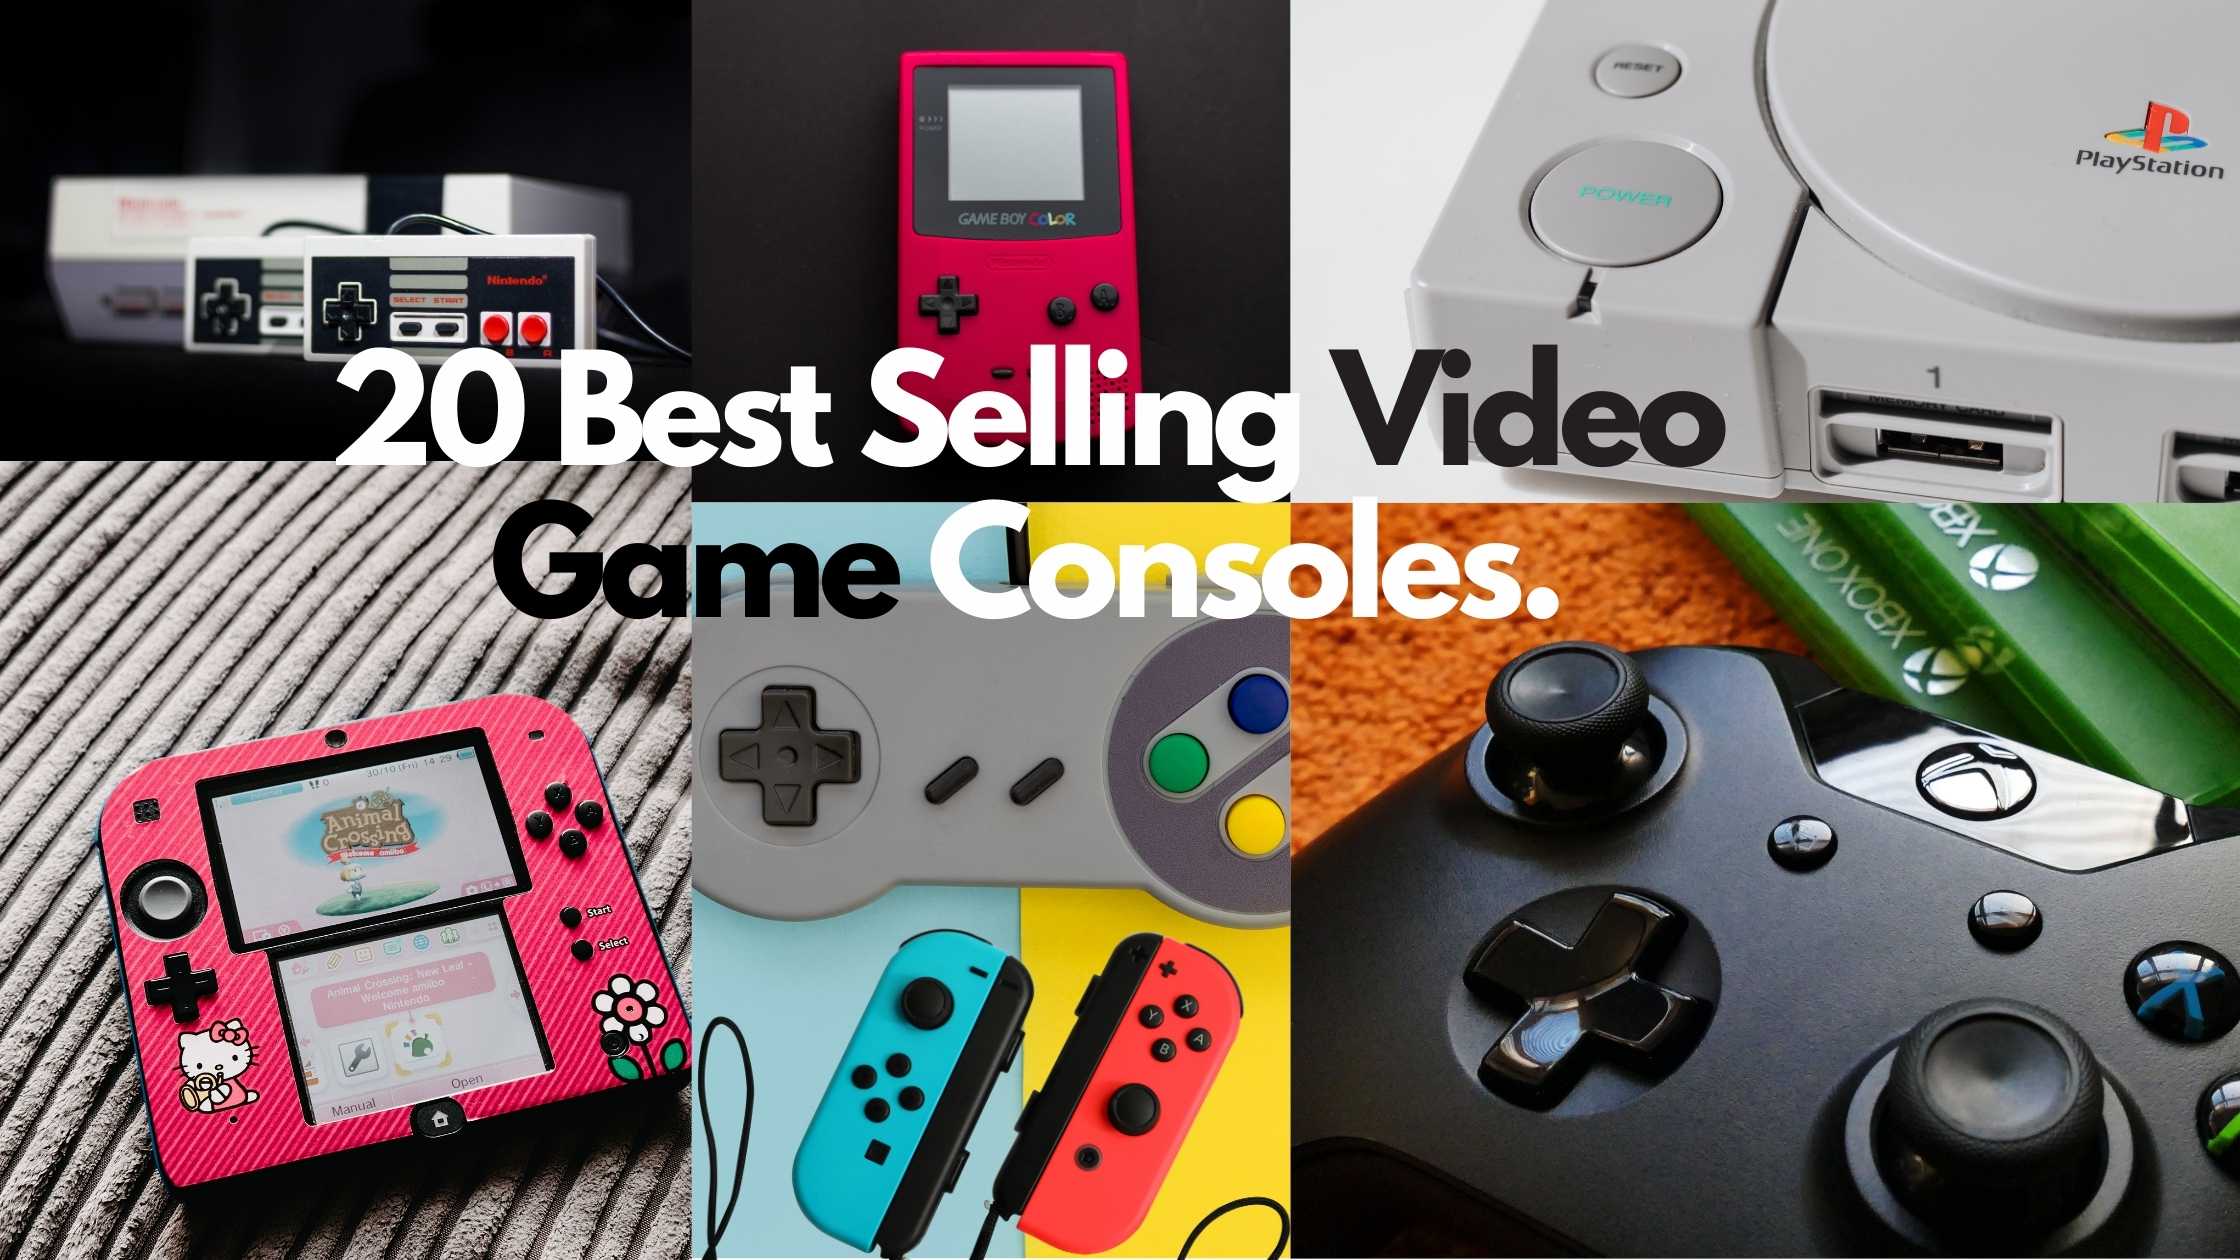 20 Best Selling Video Game Consoles